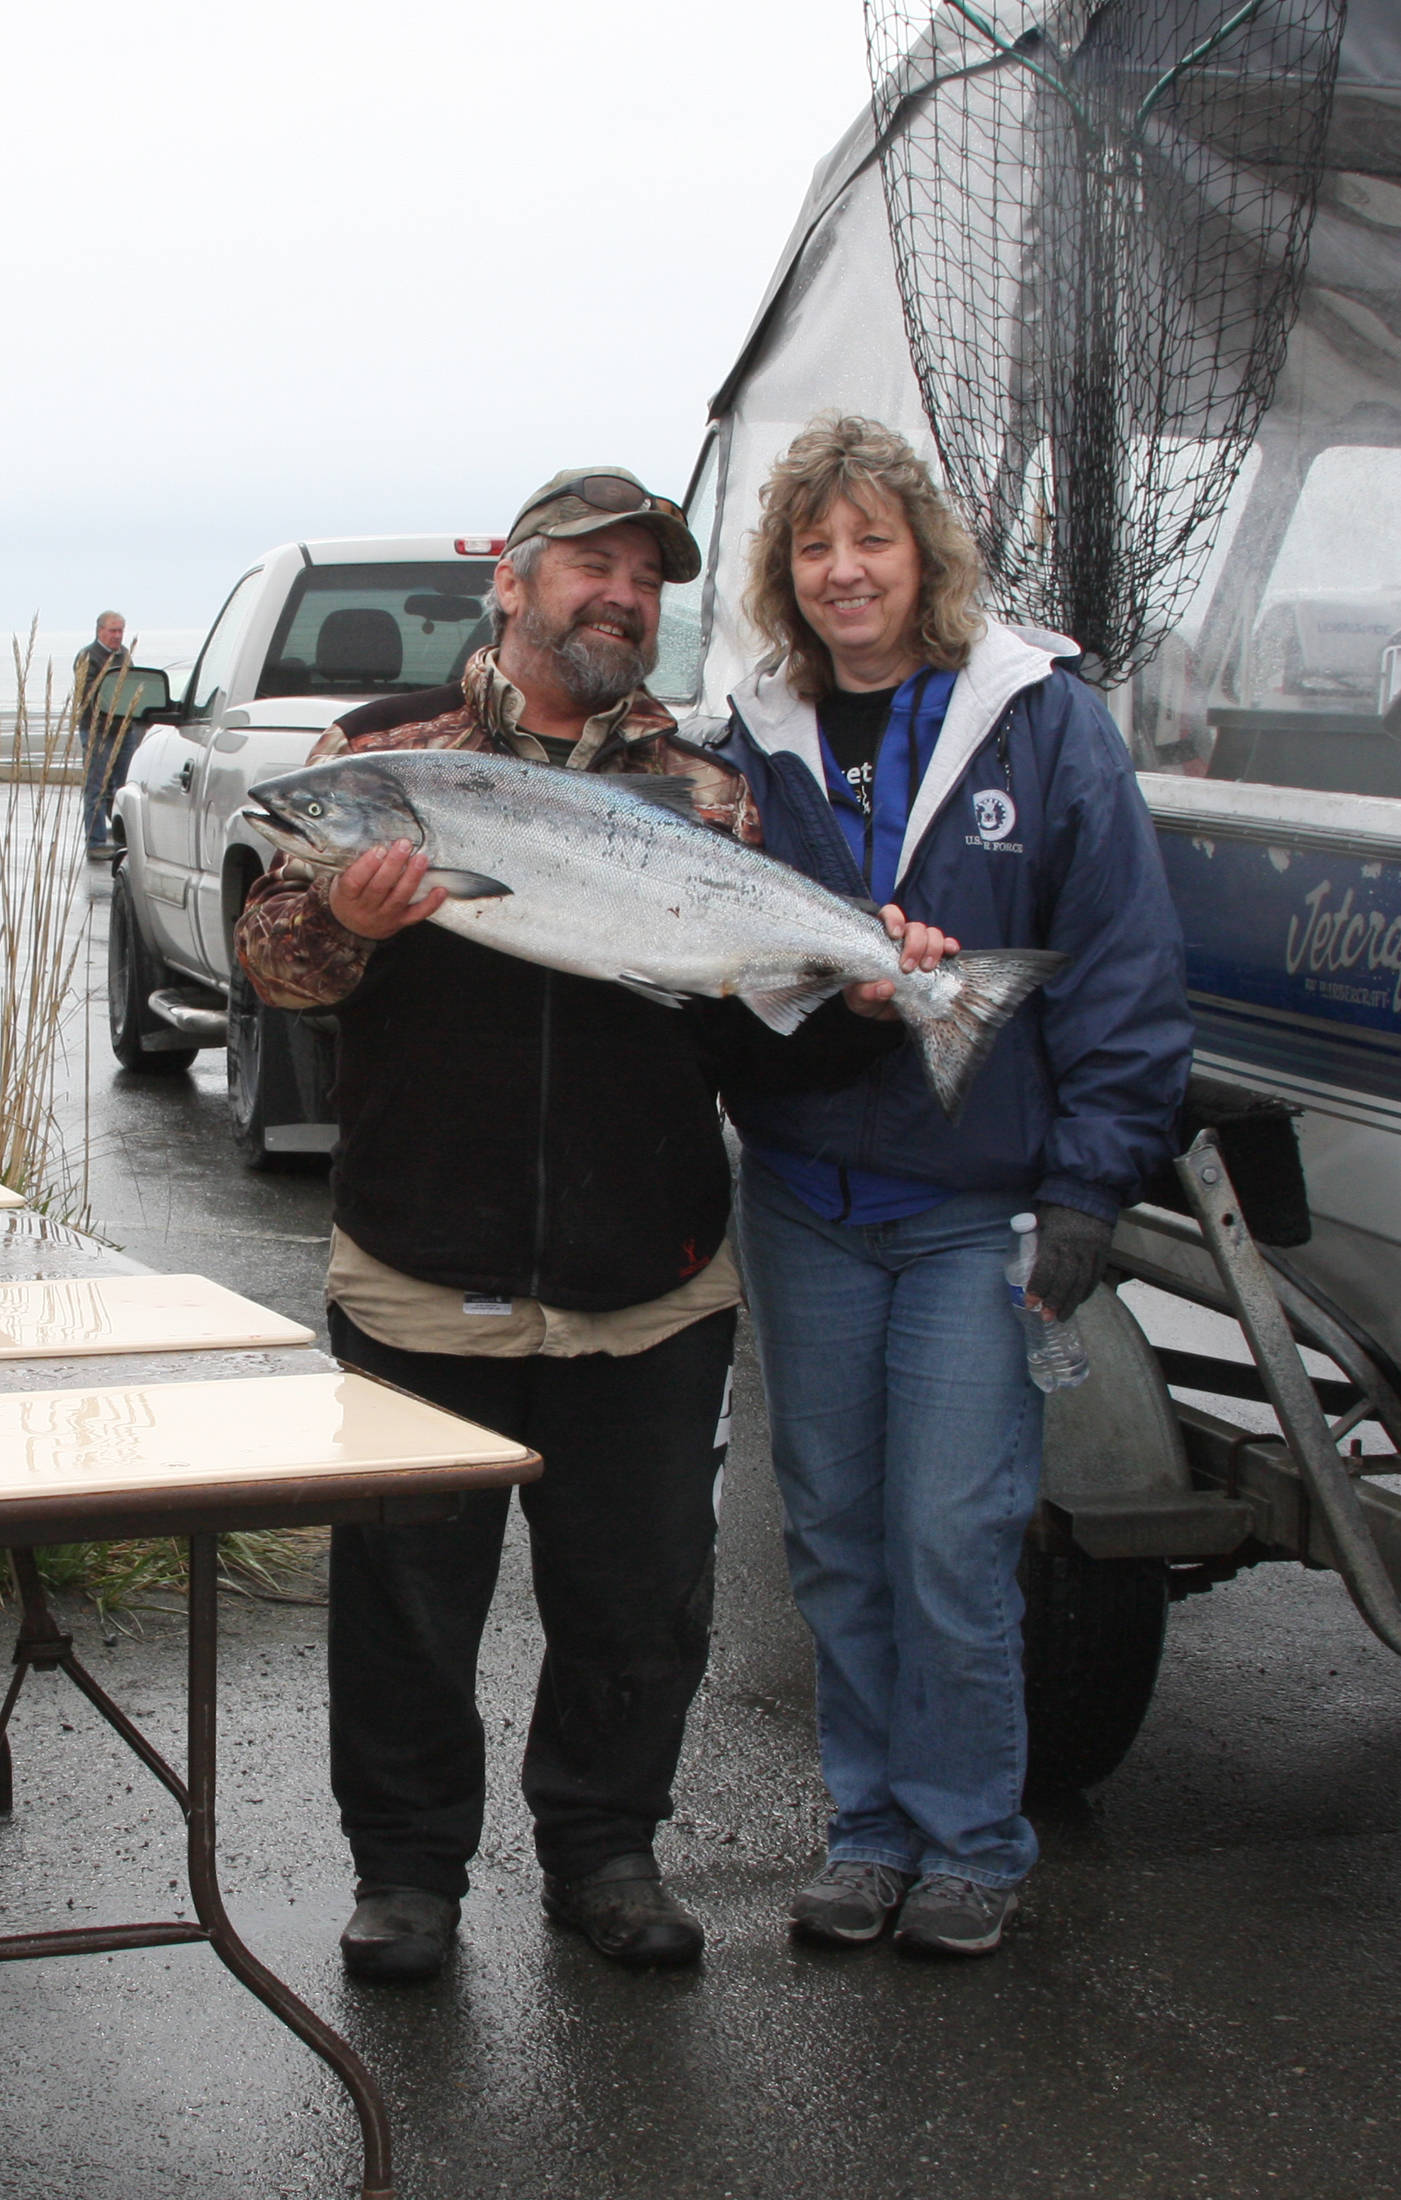 John and Yvonne Ketelle of Homer pose with one of the two king salmon caught on their boat, Circus Circus, at the weigh-in station during the Anchor Point Calcutta on Sunday, May 12, 2019 in Anchor Point, Alaska. (Photo by Delcenia Cosman)